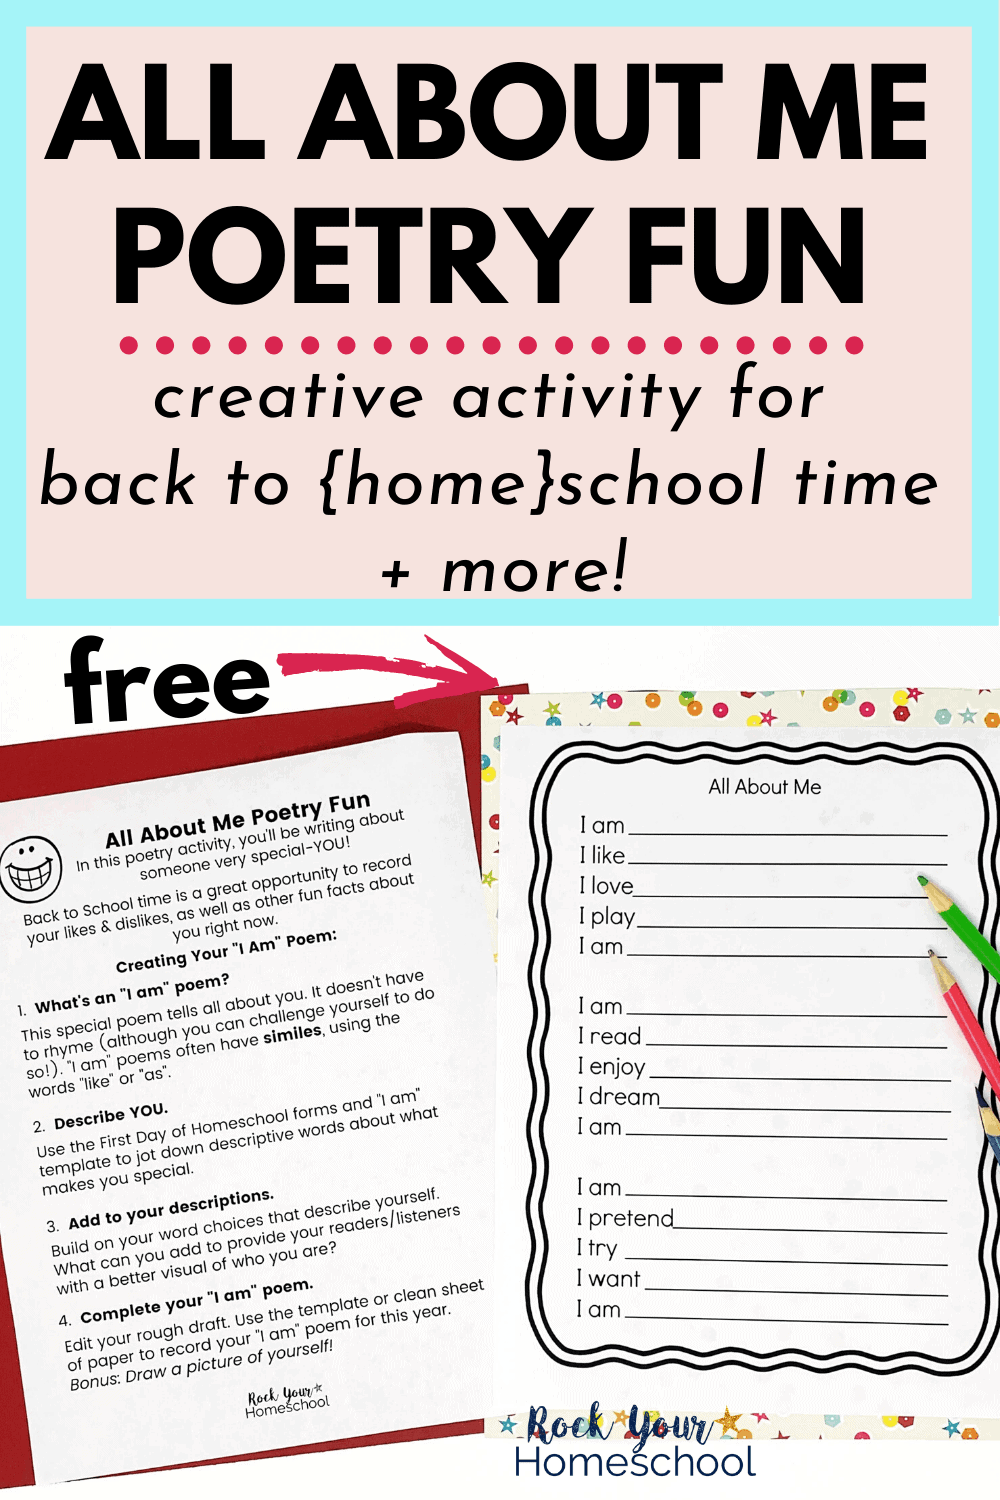 Back to School Poetry Fun with All About Me Activity